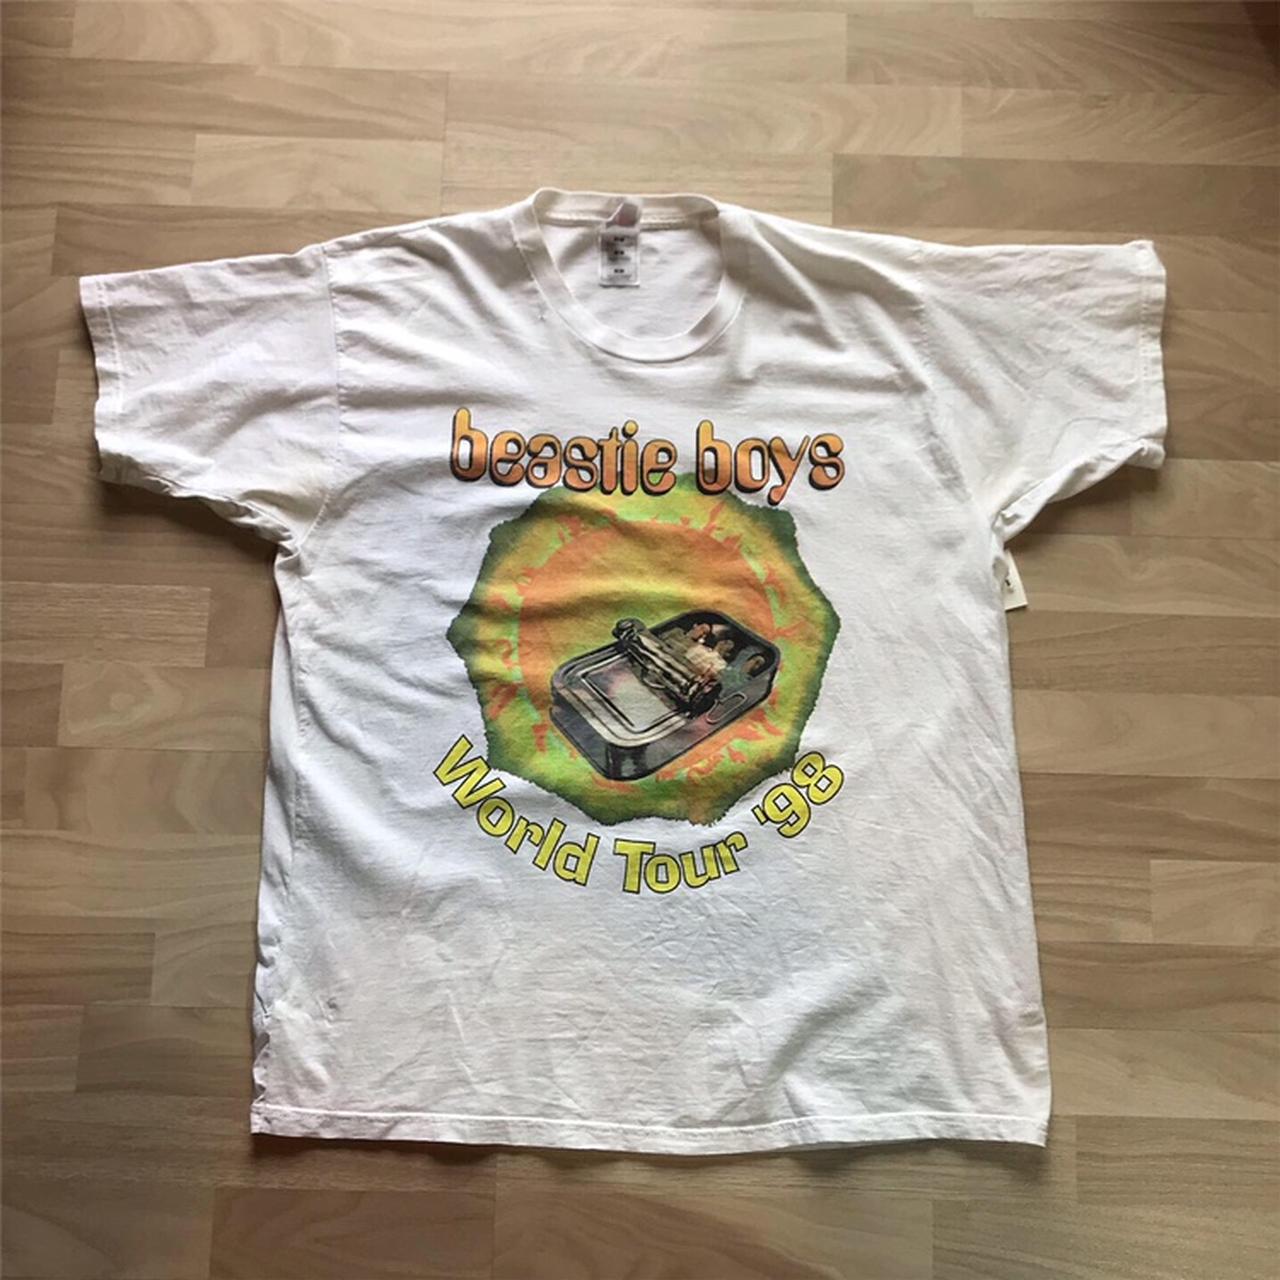 Beastie Boys Vintage Tour Tee from 1998, Size: fits...